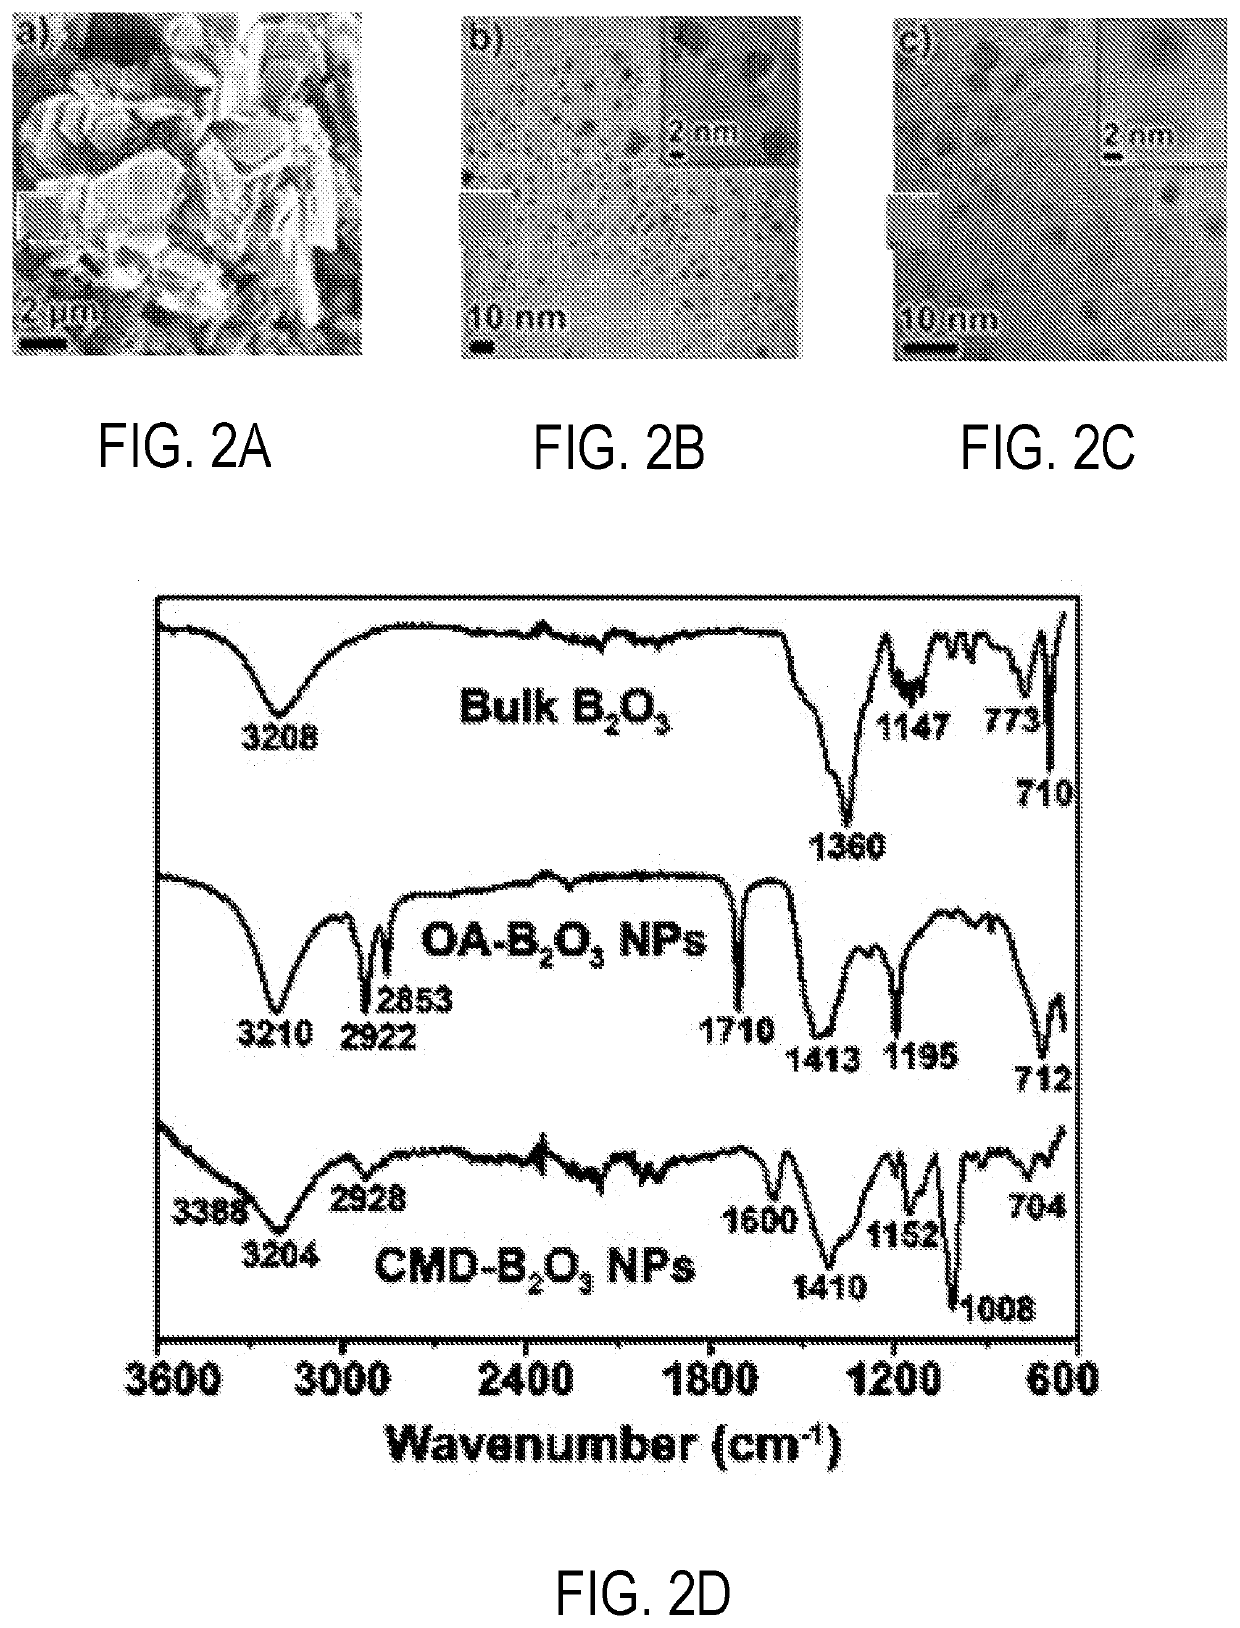 System and Method for Making Boron Oxide Nanoparticles